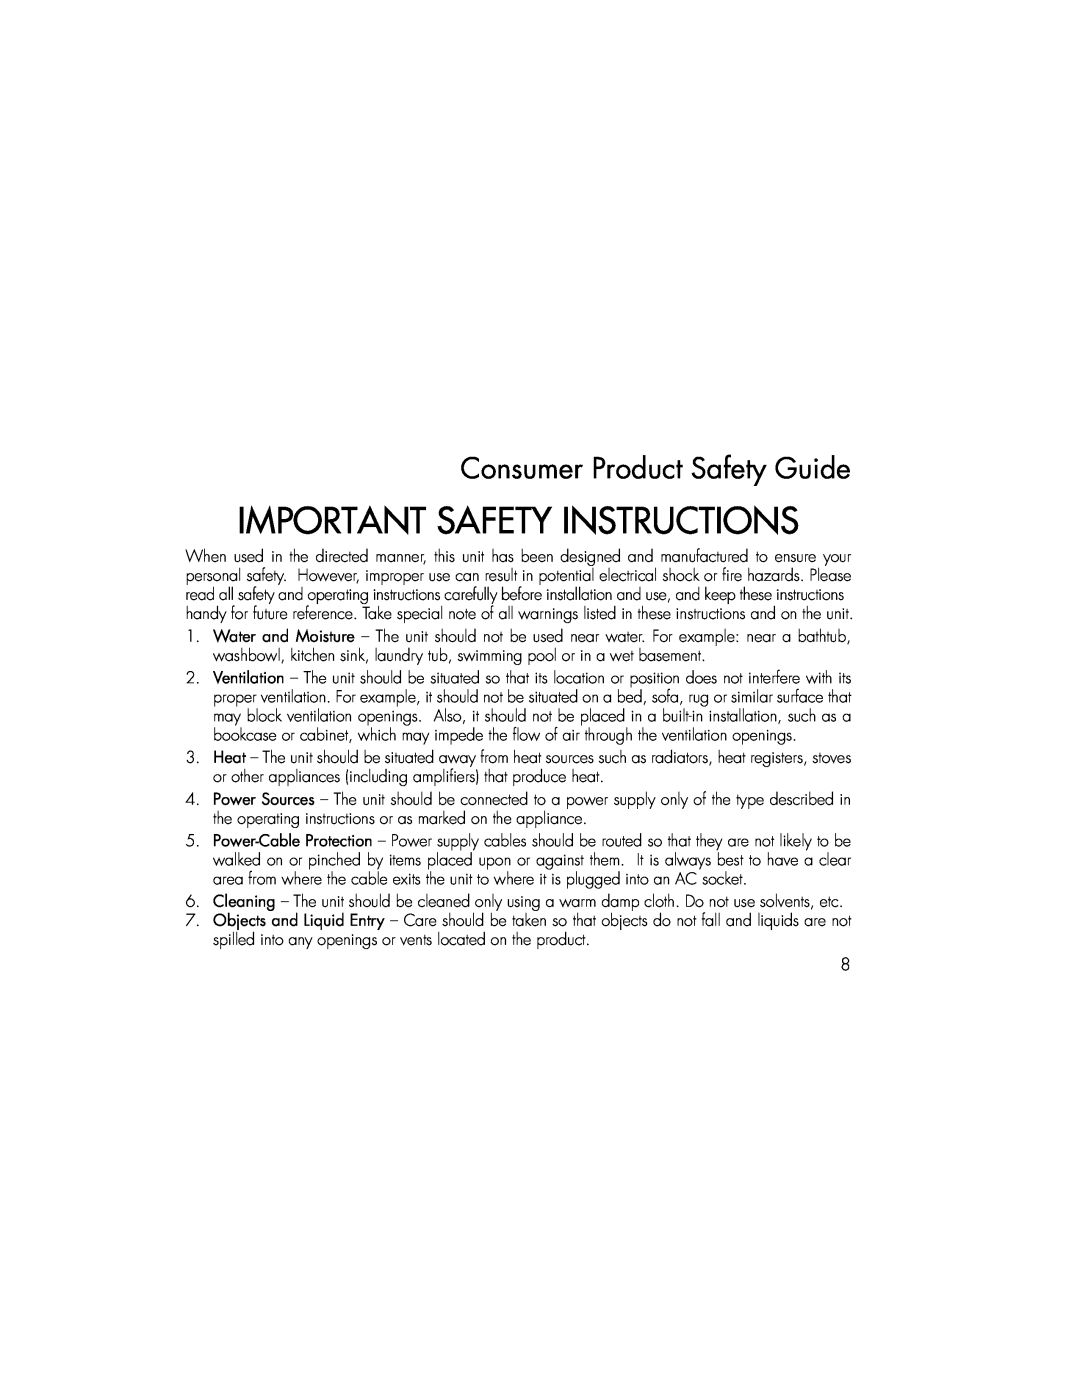 iHome iDM8 instruction manual Consumer Product Safety Guide, Important Safety Instructions 